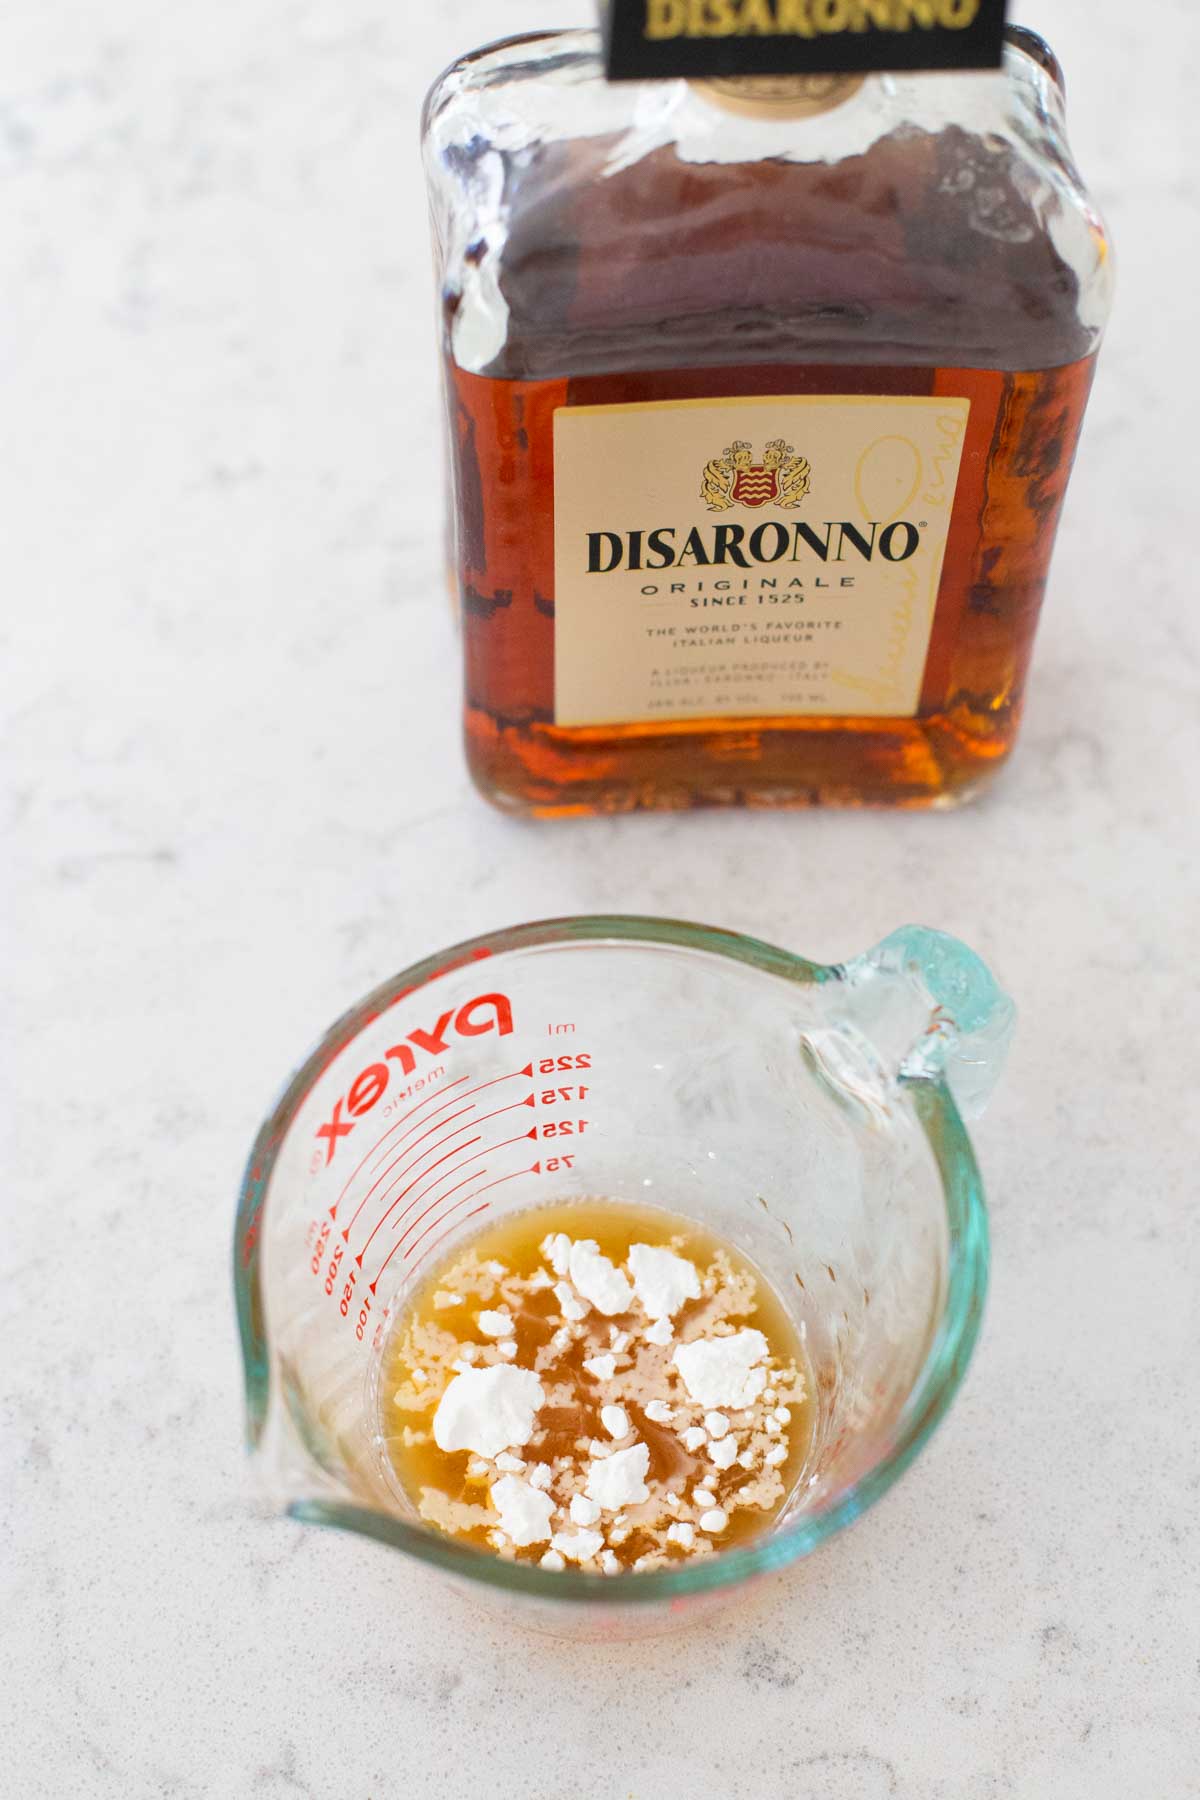 A measuring cup filled with amaretto liqueur has cornstarch sprinkled over the top.